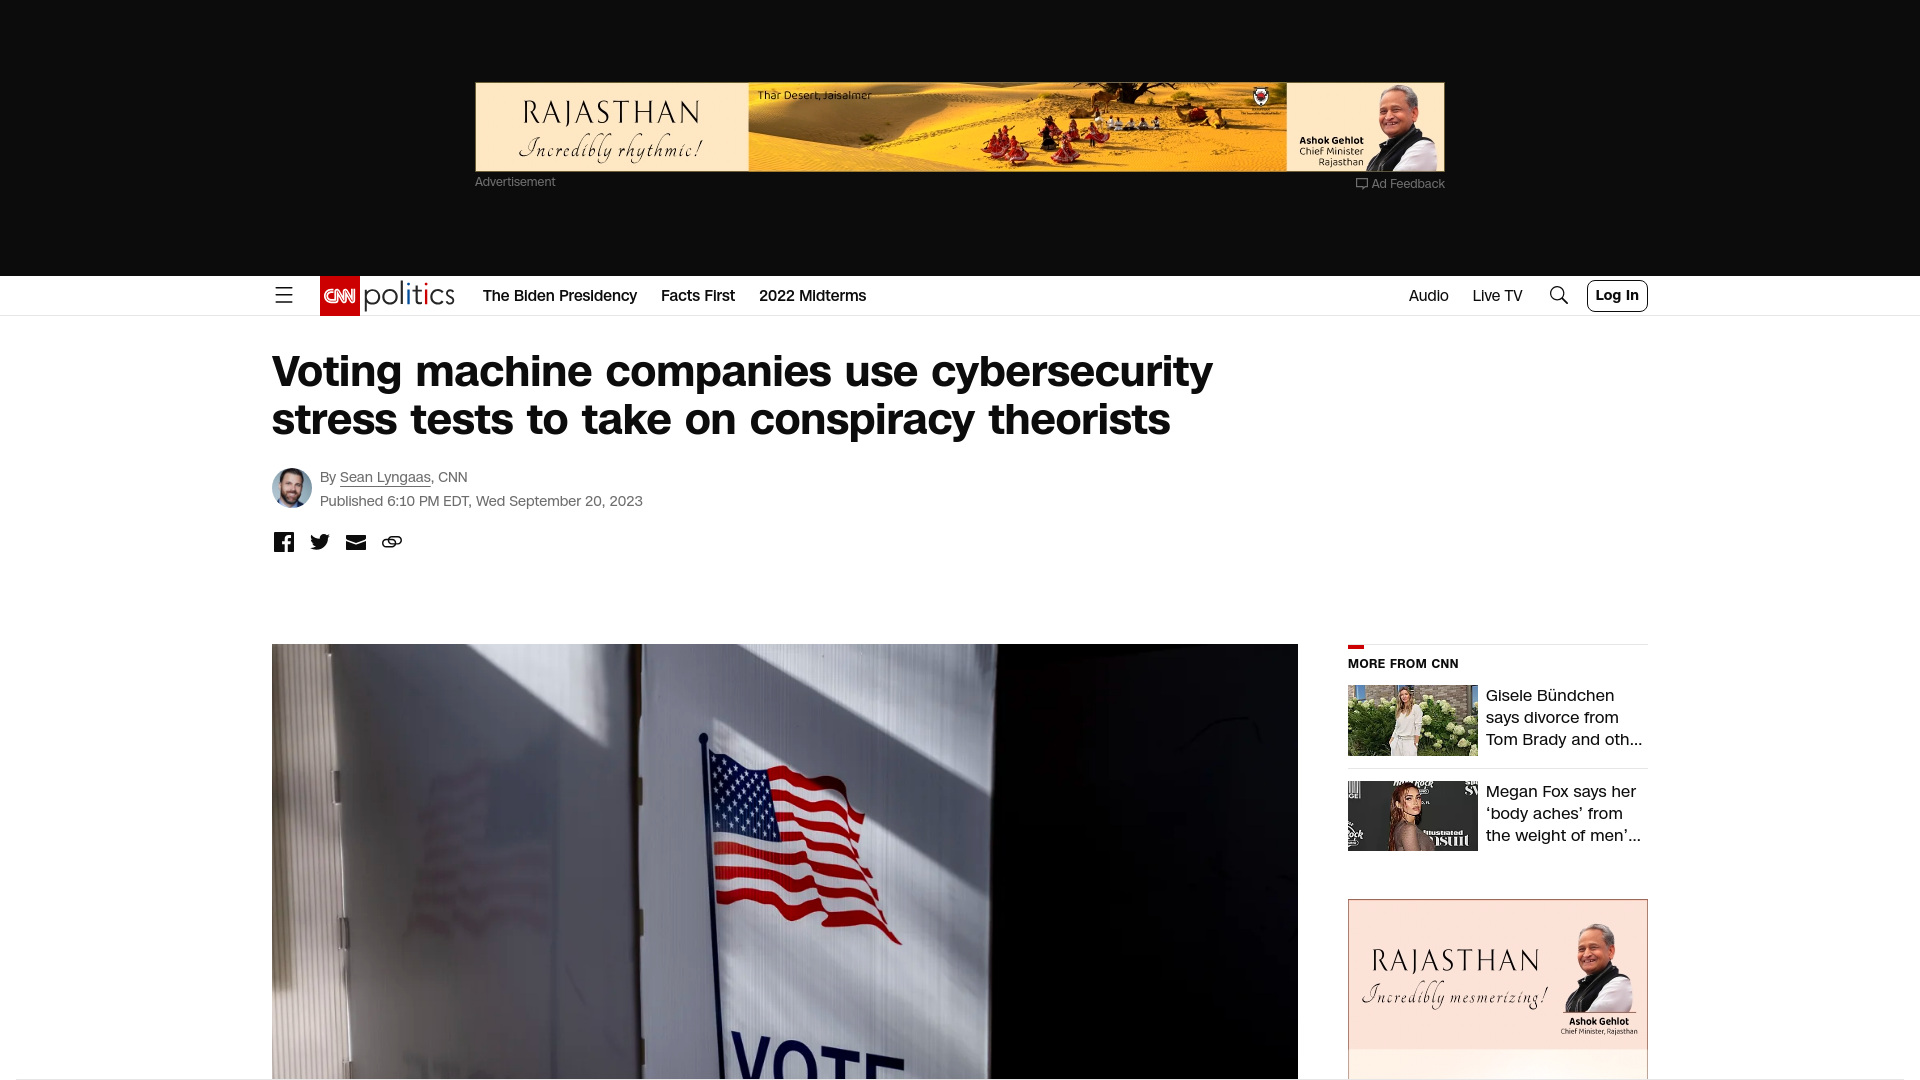 Voting machine companies use cybersecurity stress tests to take on conspiracy theorists | CNN Politics